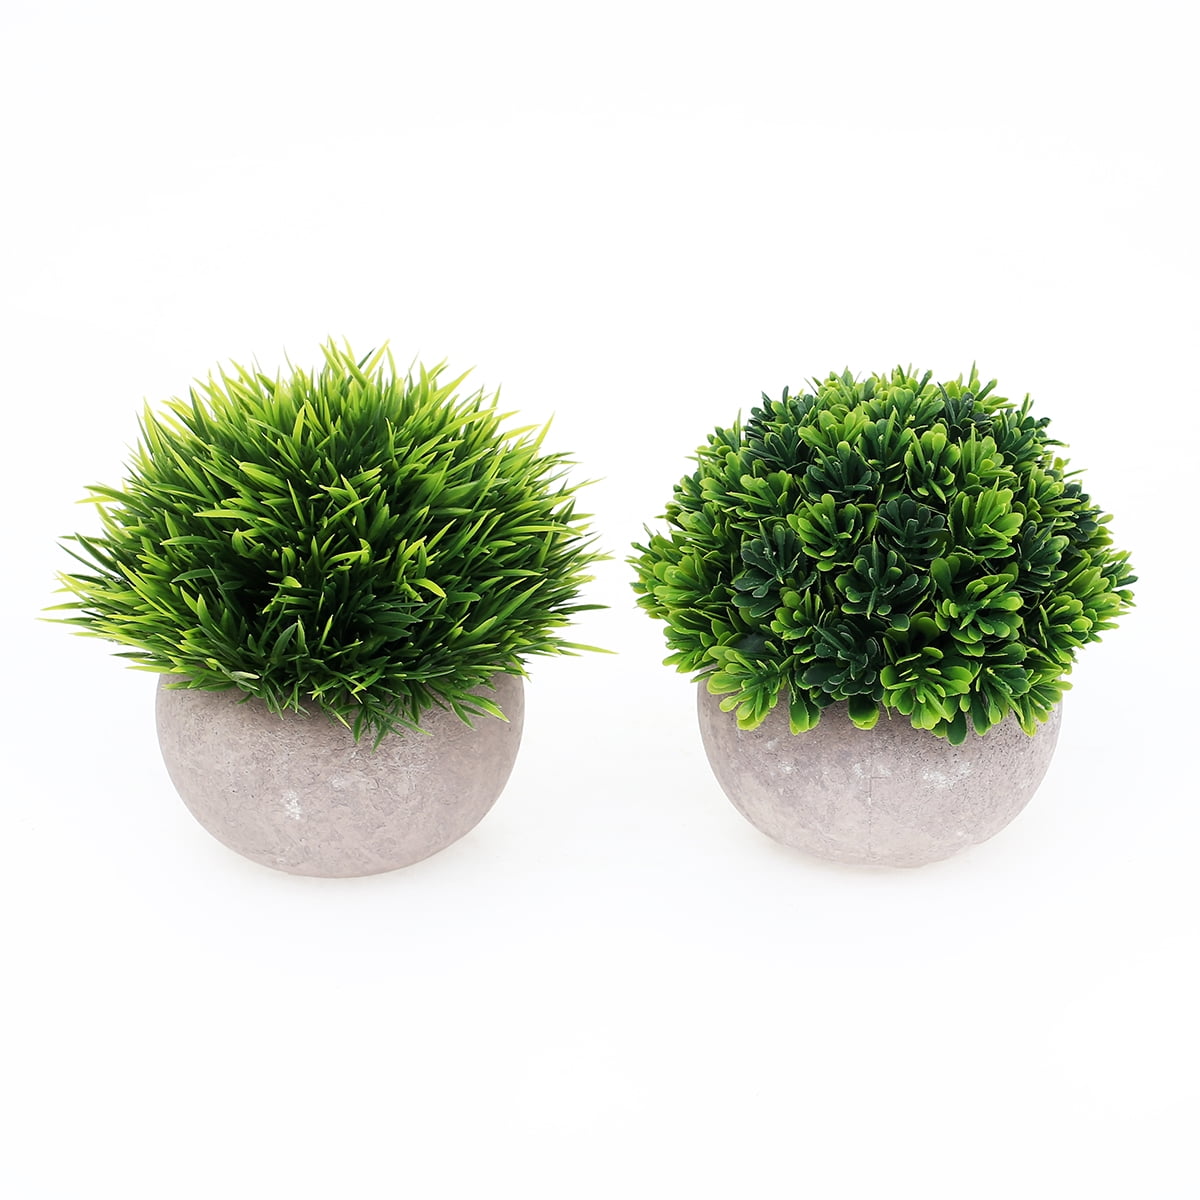 Home Indoor Room Decorations Artificial Plants,Mini Potted Fake Plants 2 Packs Green Grass Faux Greenery Topiary Shrubs for Office